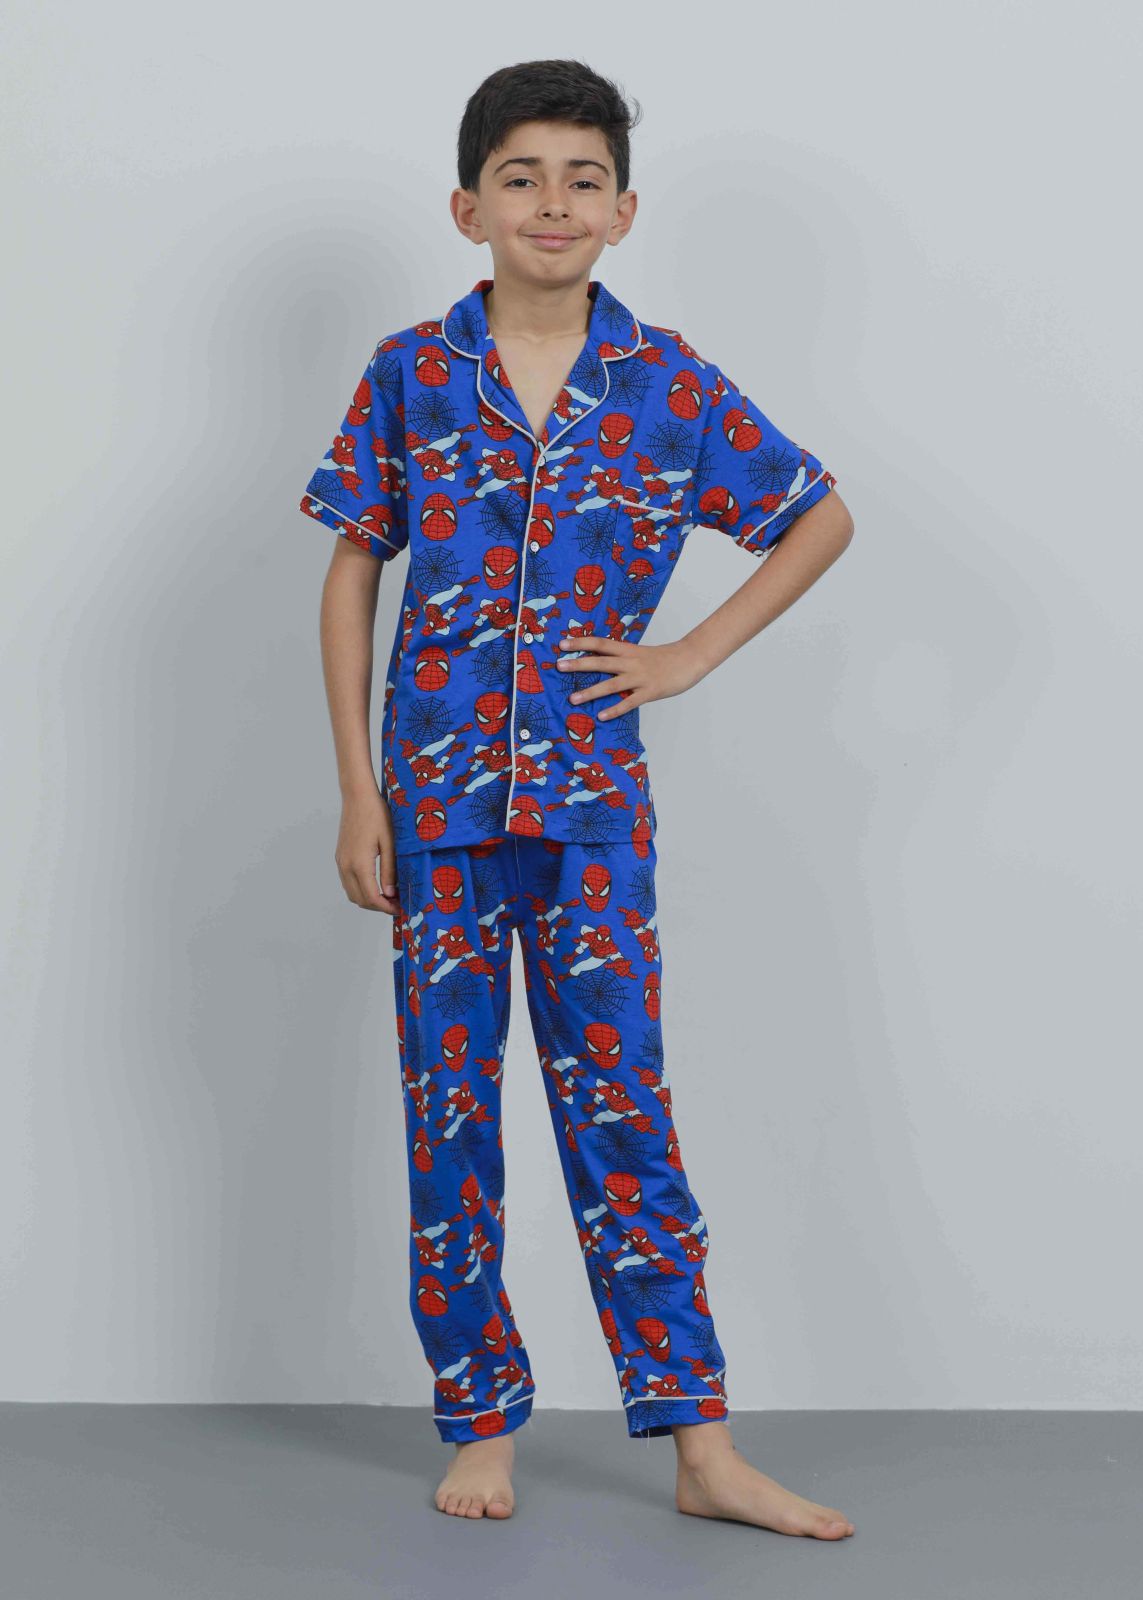 Buy Kids and bebs Night Suit for Kids Boys and Girls Night wearsleeping wear  ightyprinted Thermal Printed Night Suit and Sleeping wear (2-3 Years) Blue  at Amazon.in